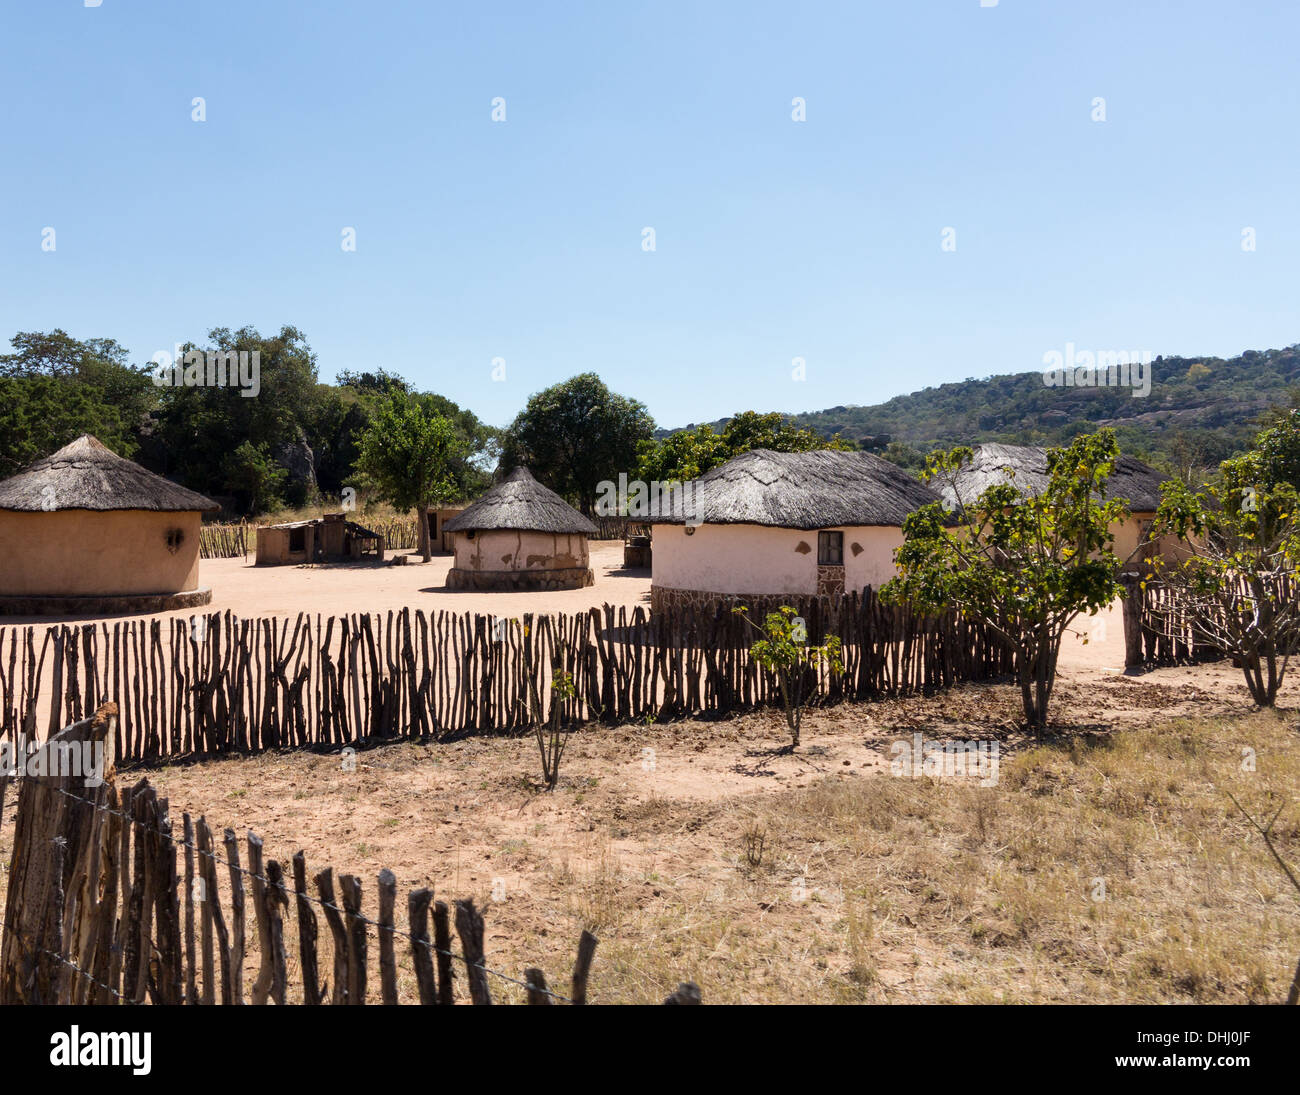 View of thatched mud homes in typical African village in Zimbabwe, Africa Stock Photo